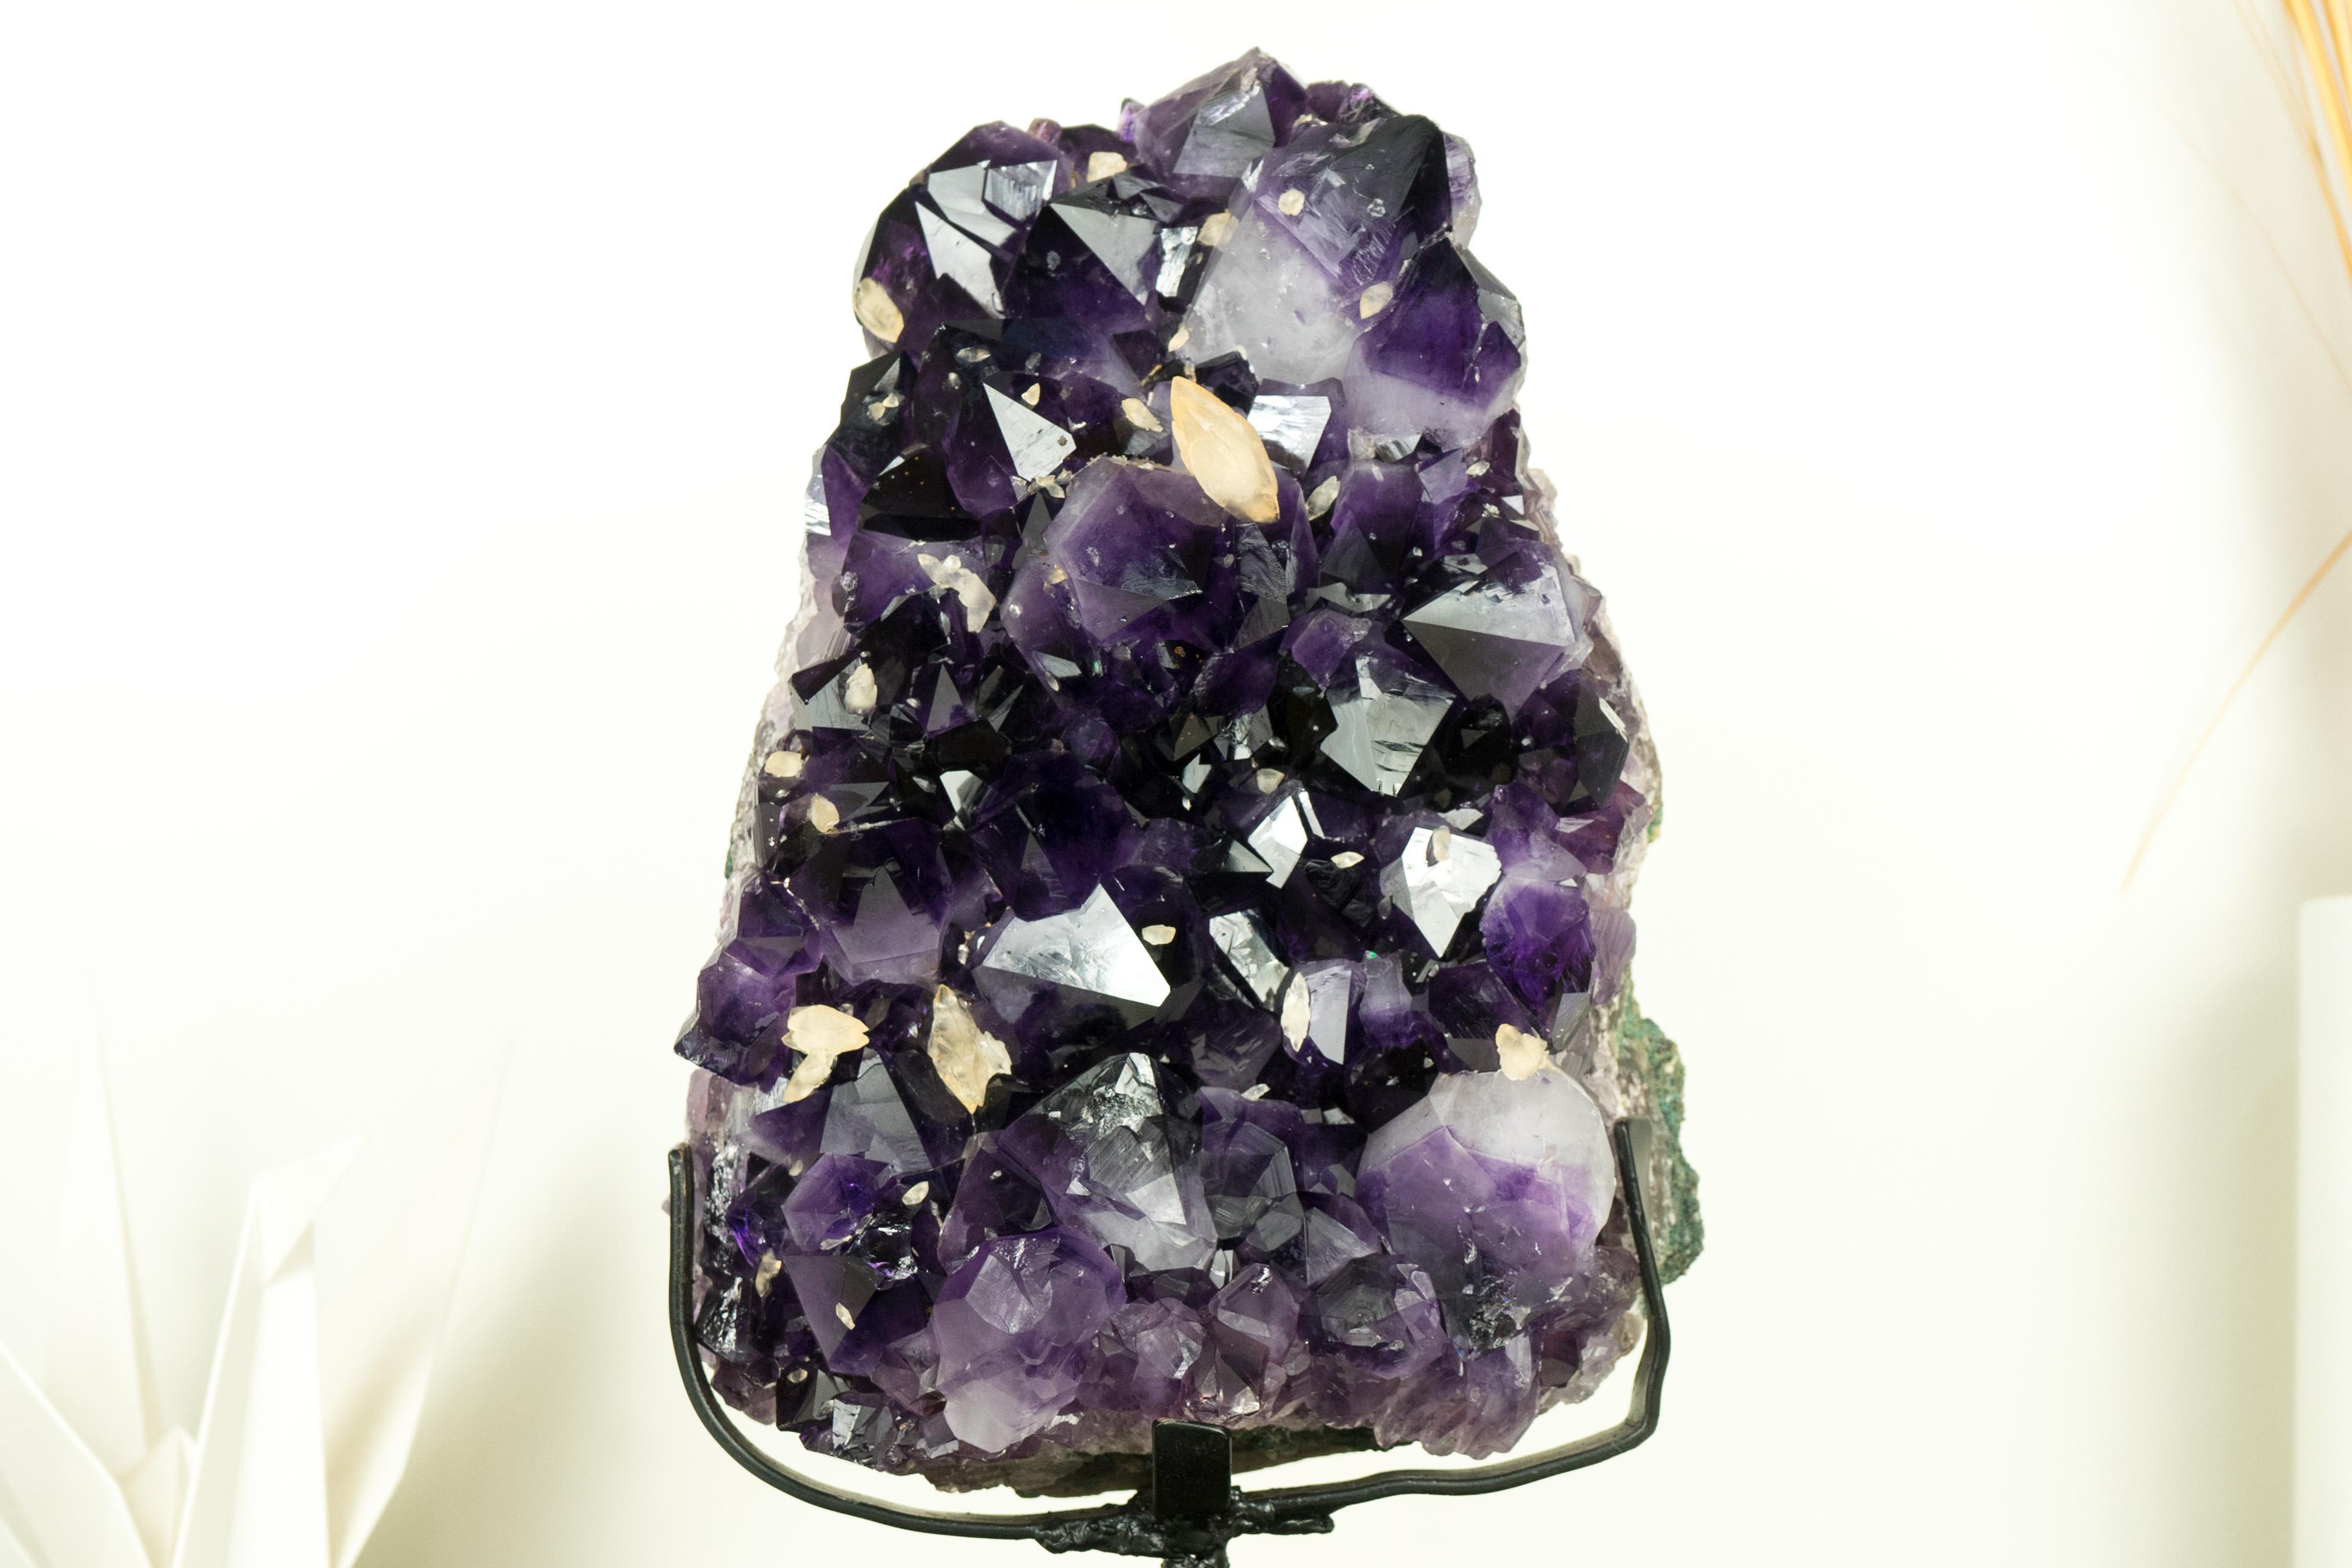 A gallery-grade amethyst cluster that delivers world-class aesthetics to be the centerpiece of your collection. This Amethyst features large, super saturated dark druzy as well as double-terminated calcite inclusions, making it an exceptional